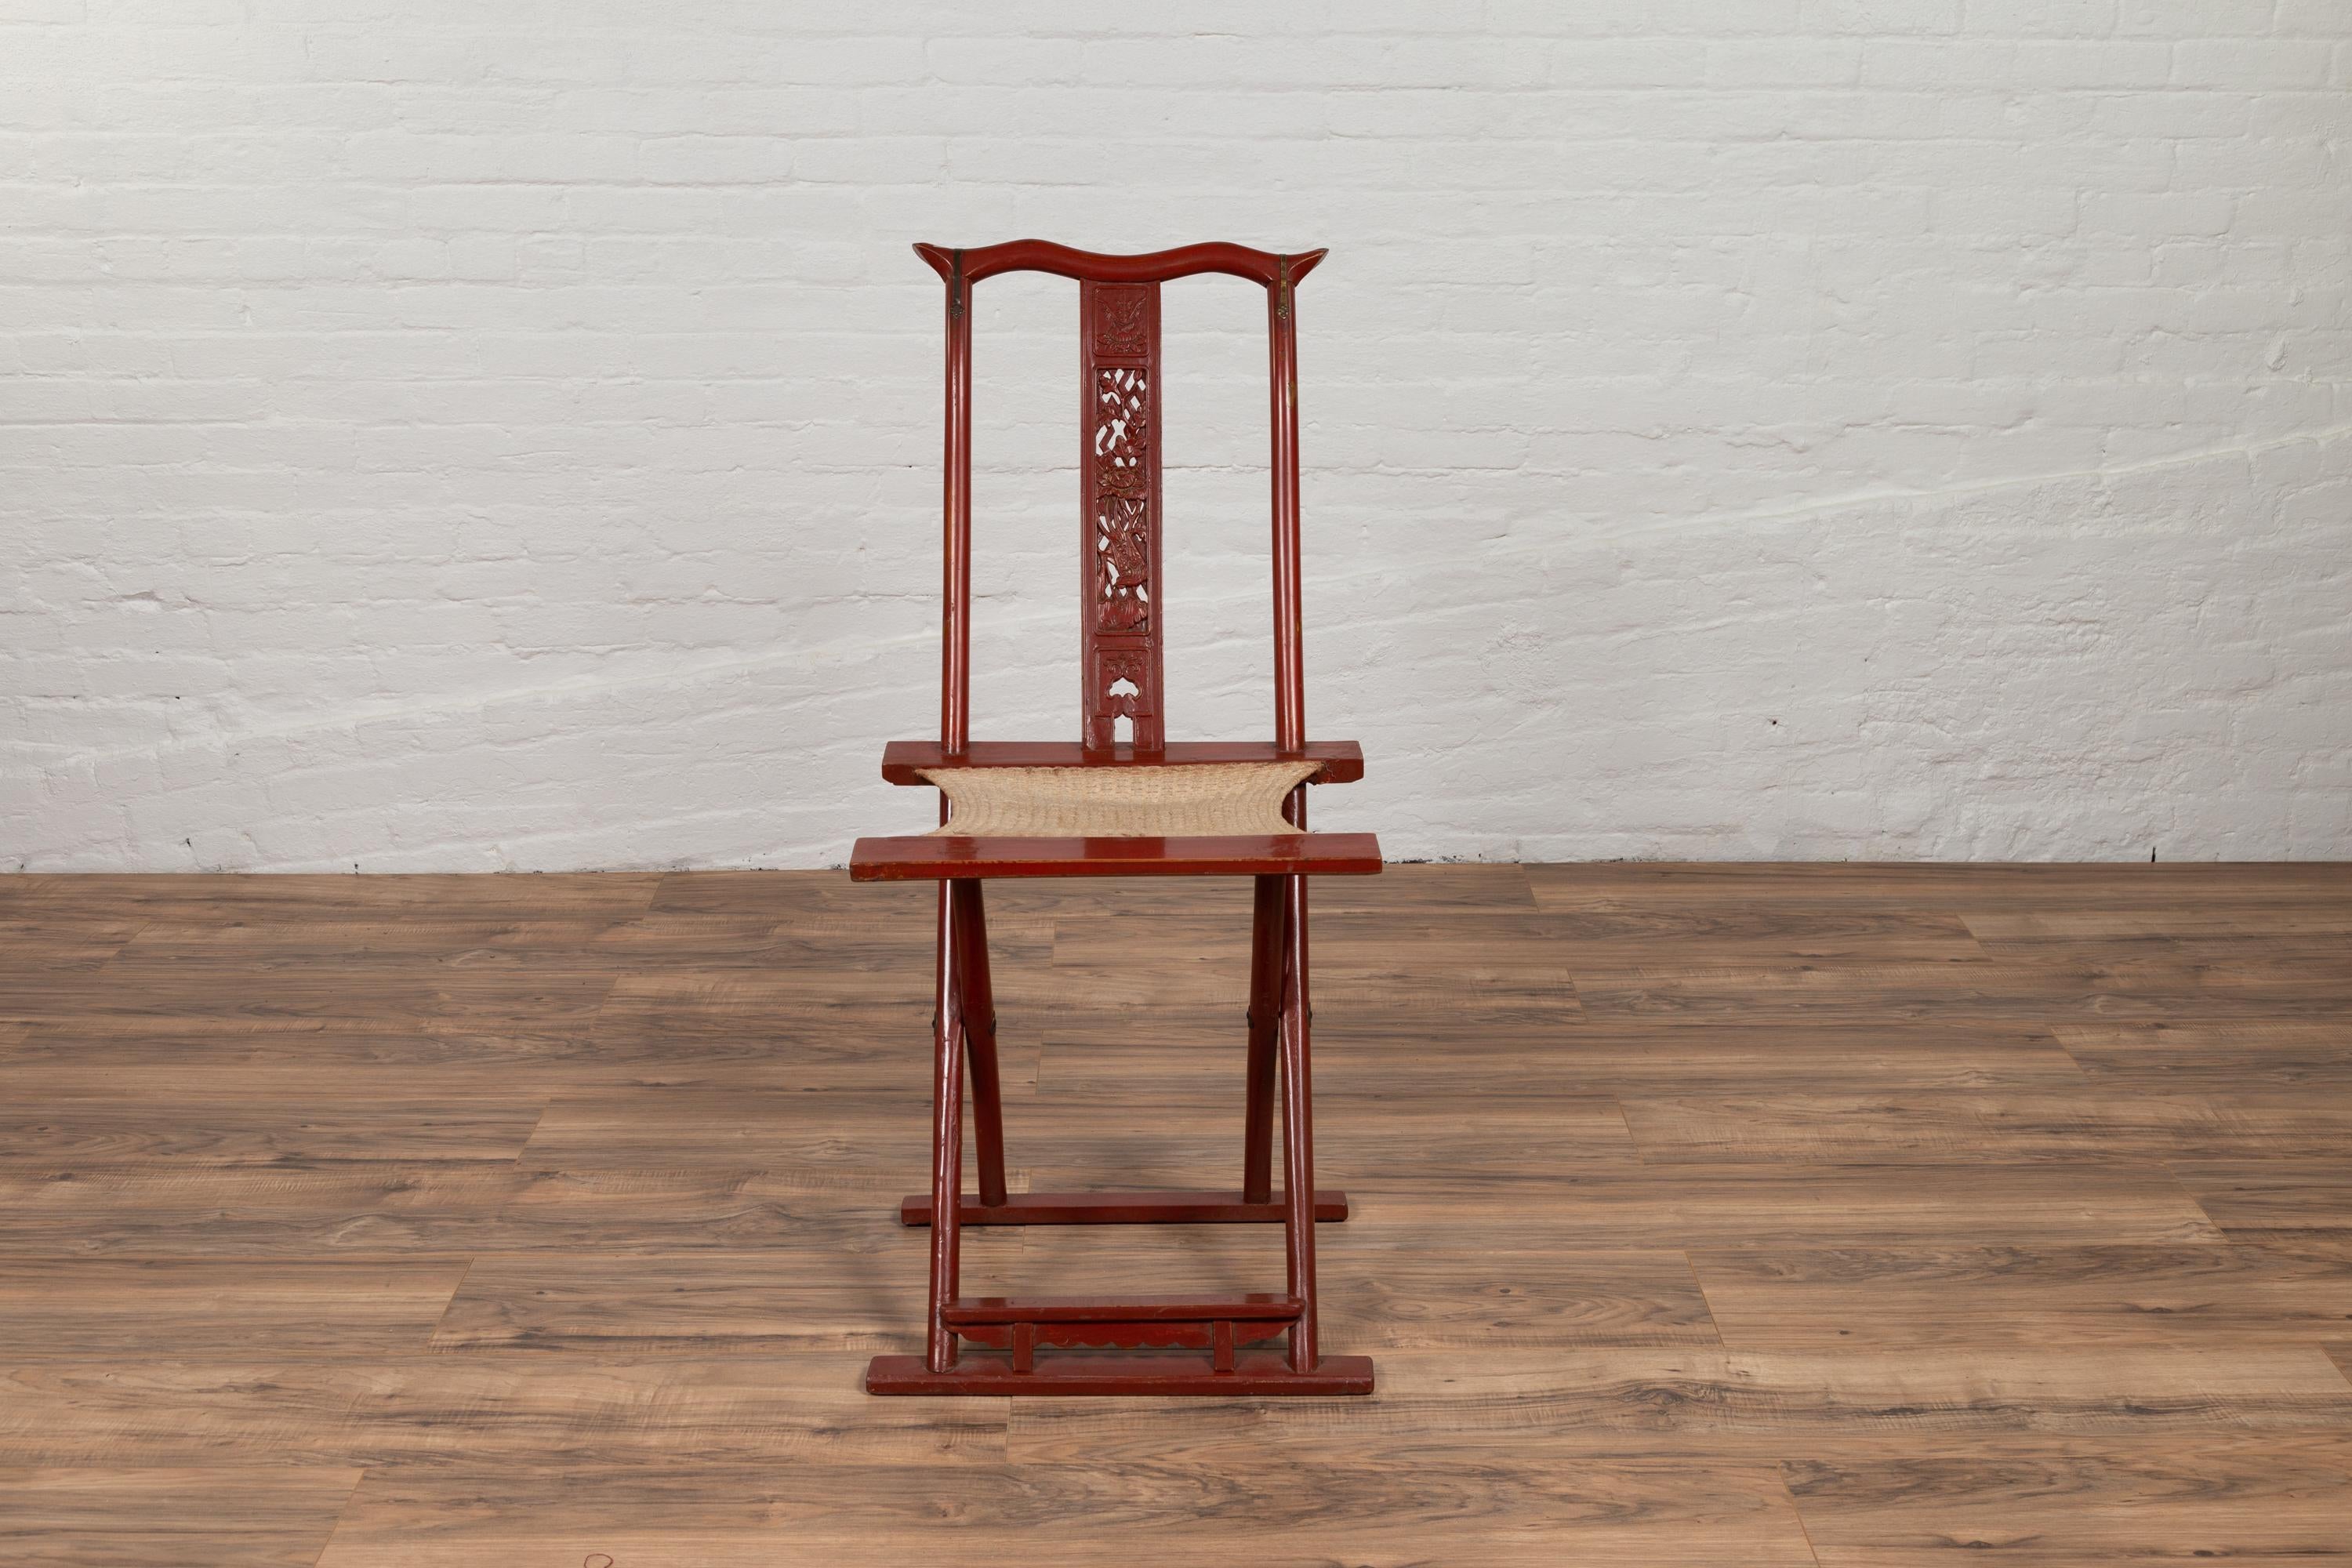 A Chinese late Qing Dynasty period red lacquered folding traveller’s chair from the early 20th century, with carved motifs, footrest and woven fabric. This early 20th-century antique Chinese traveler's chair is a striking example of functionality